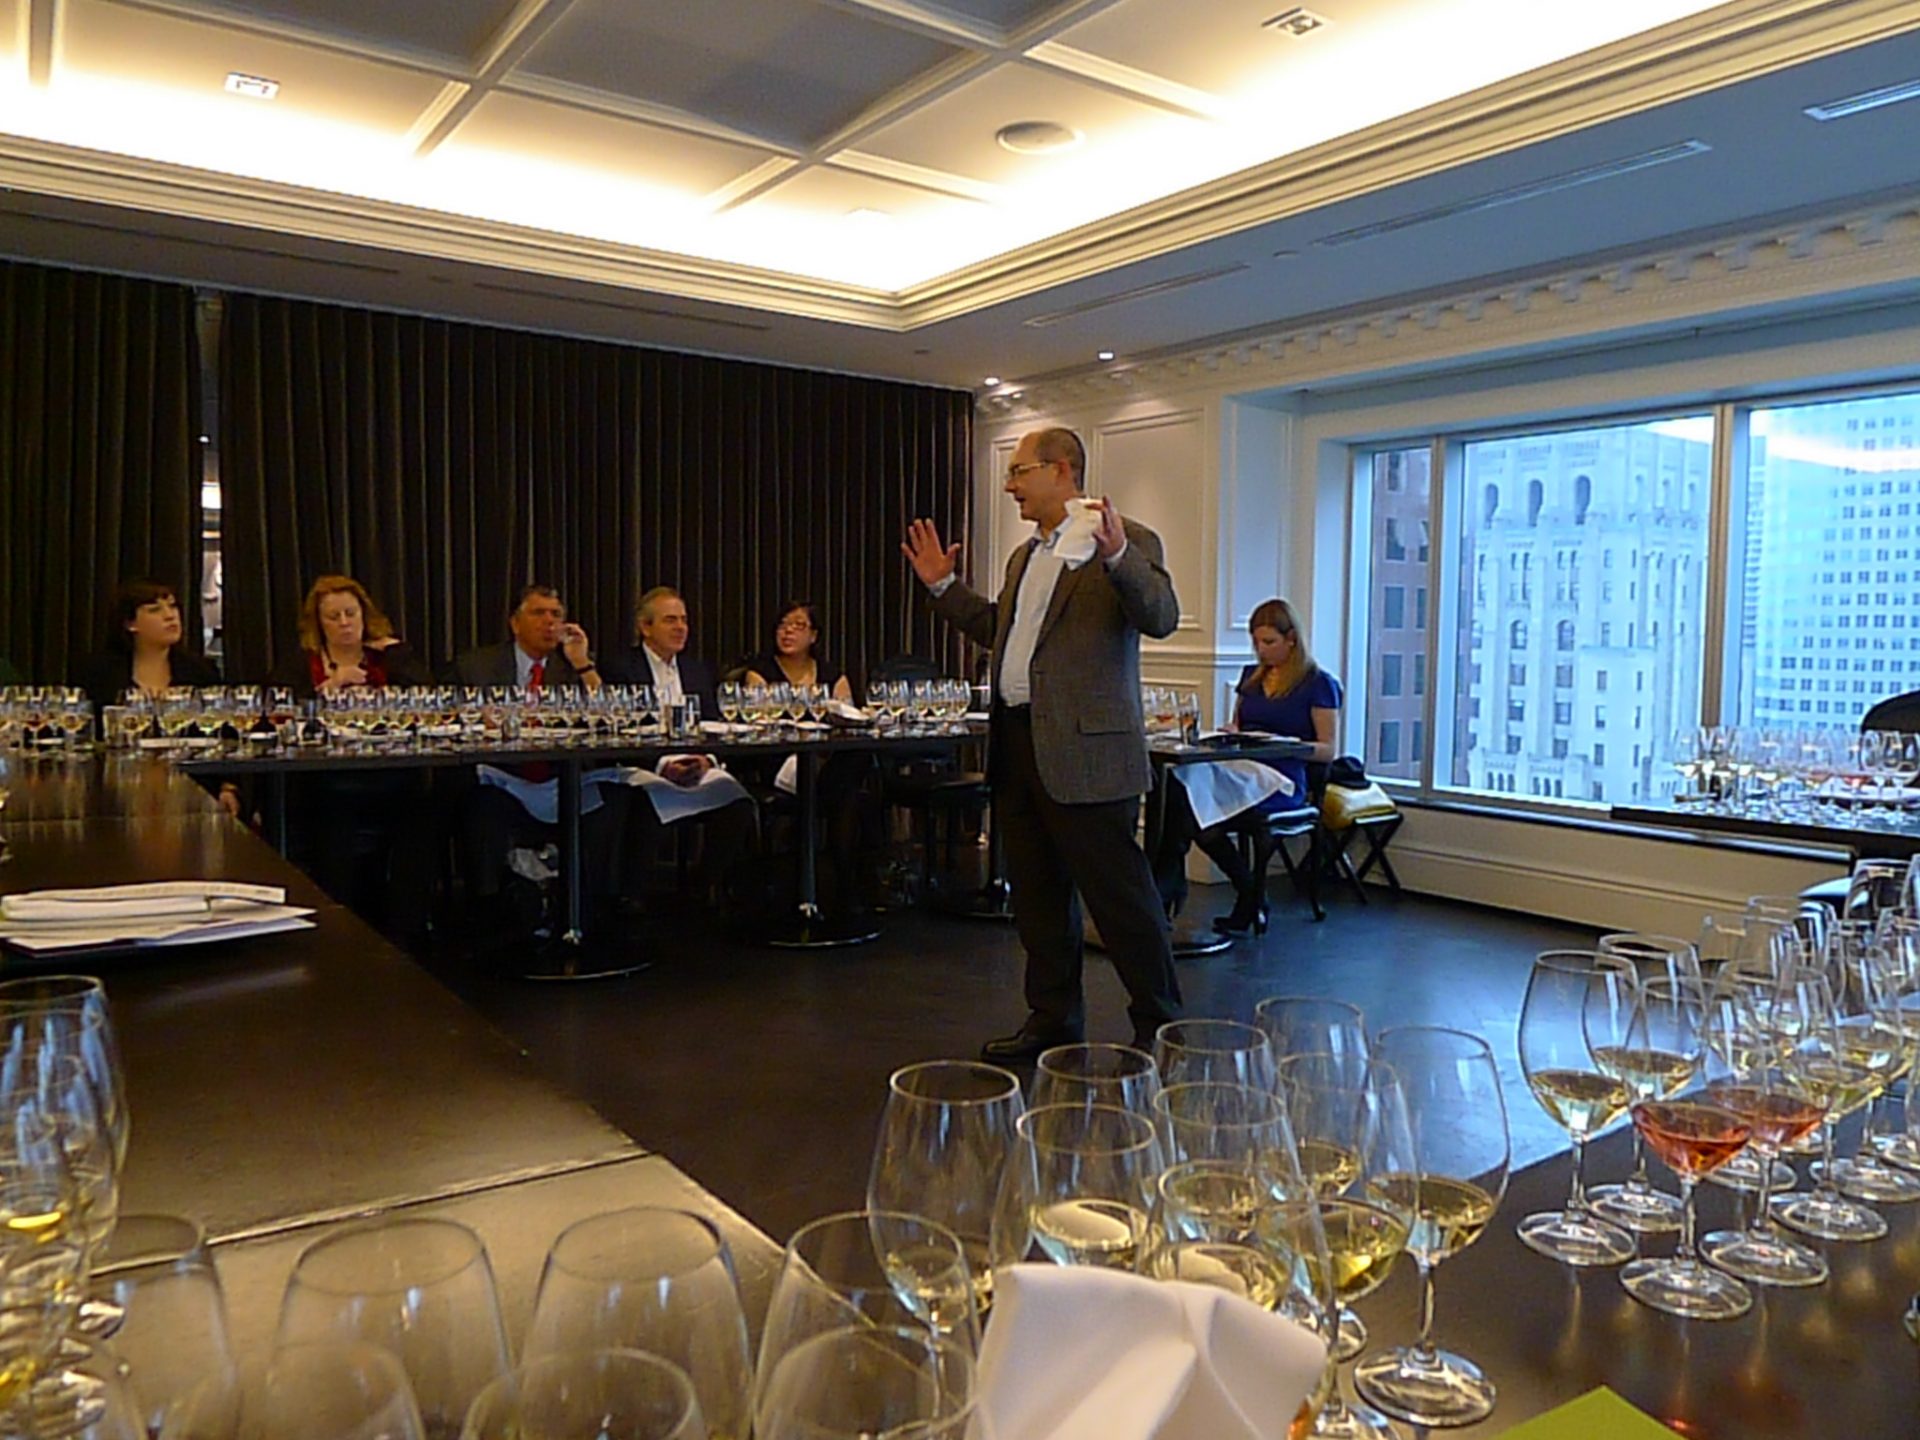 Cave Spring's Angelo Pavan adressed the room, speaking of his personal experiences producing sparkling wine in Ontario